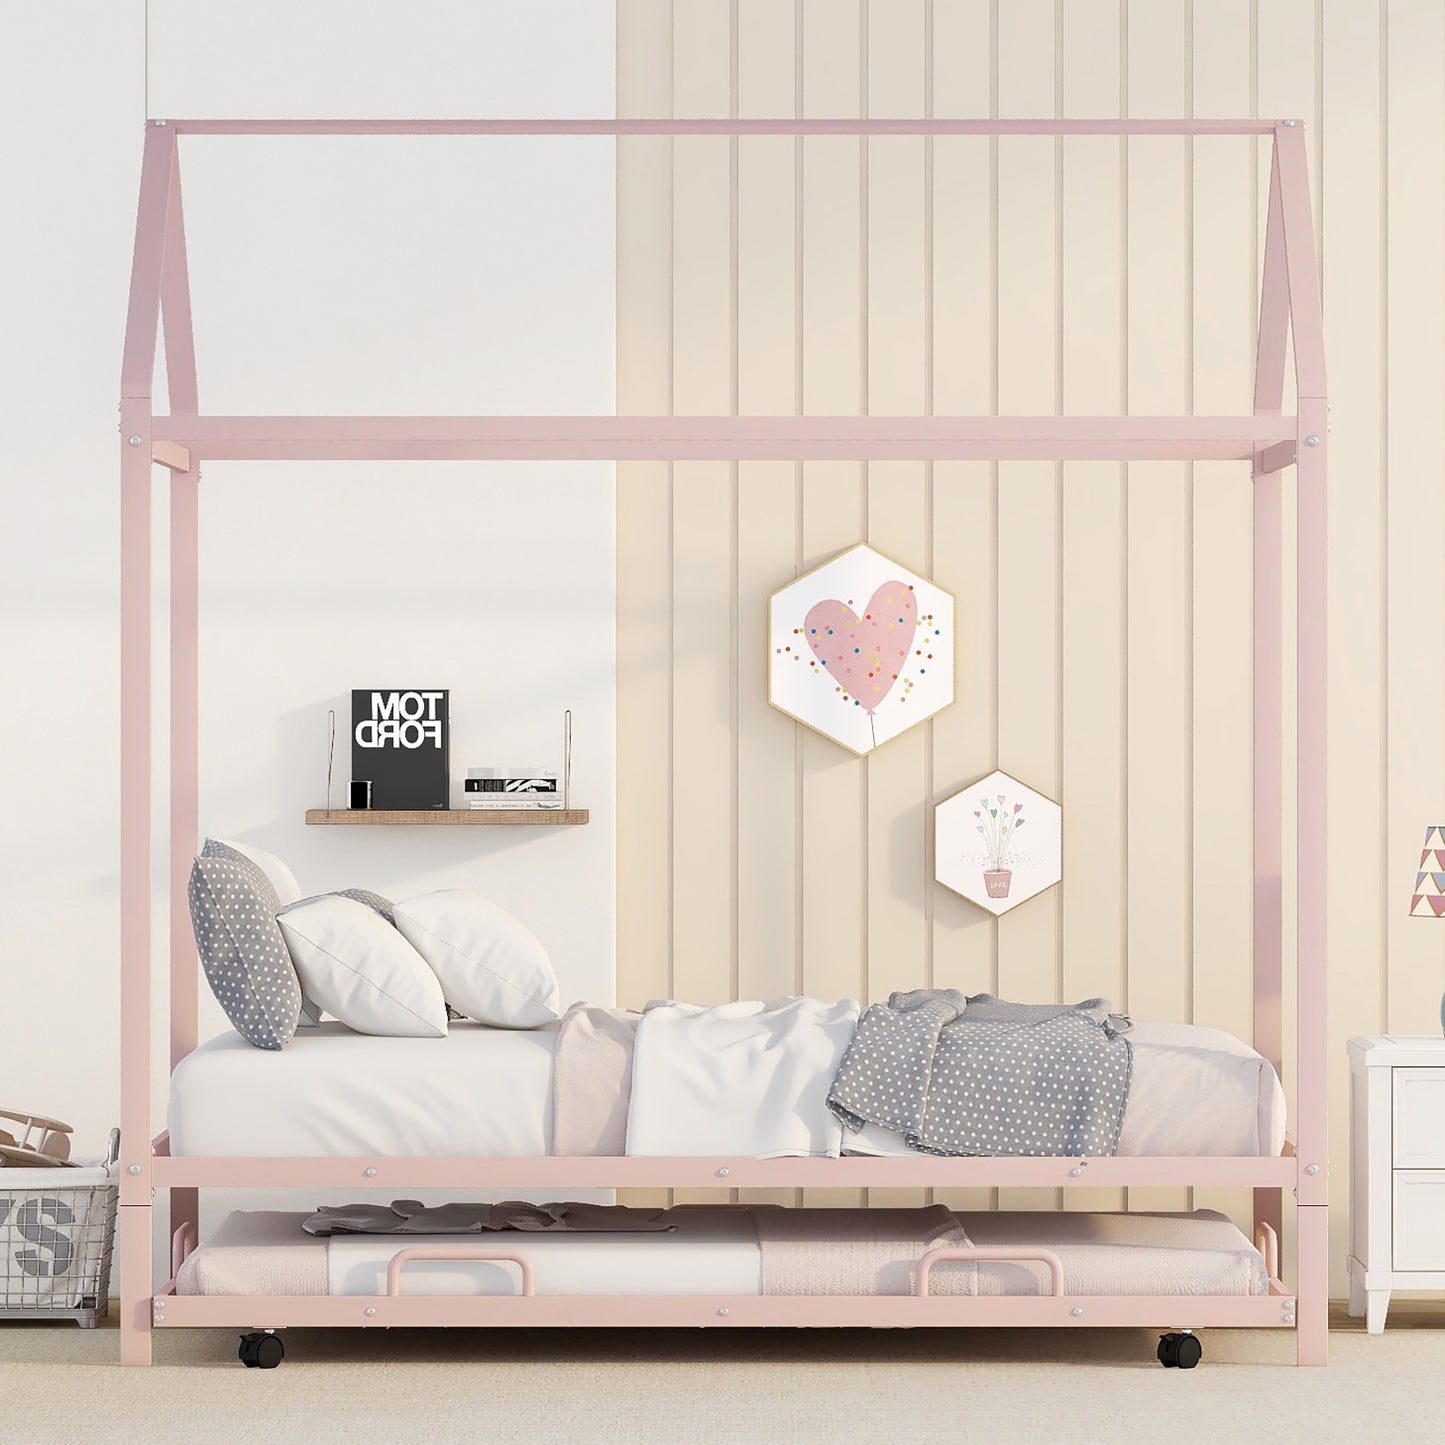 Twin Size Kids House Platform Bed With Trundle, Metal House Bed Pink